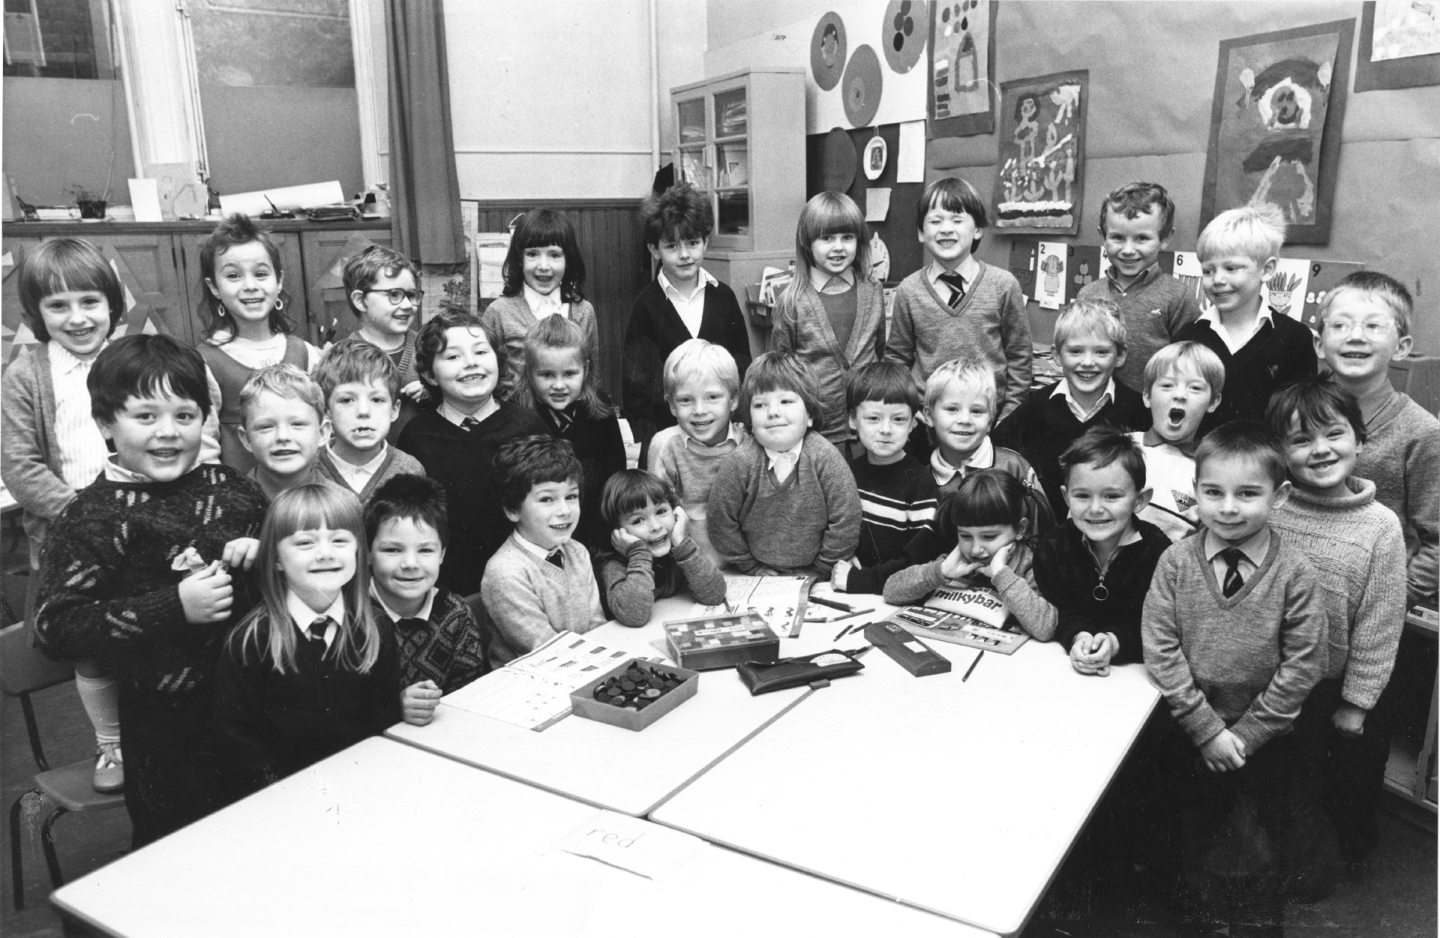 Walker Road School's Primary 2 pose for the camera during a break from lessons in 1987.